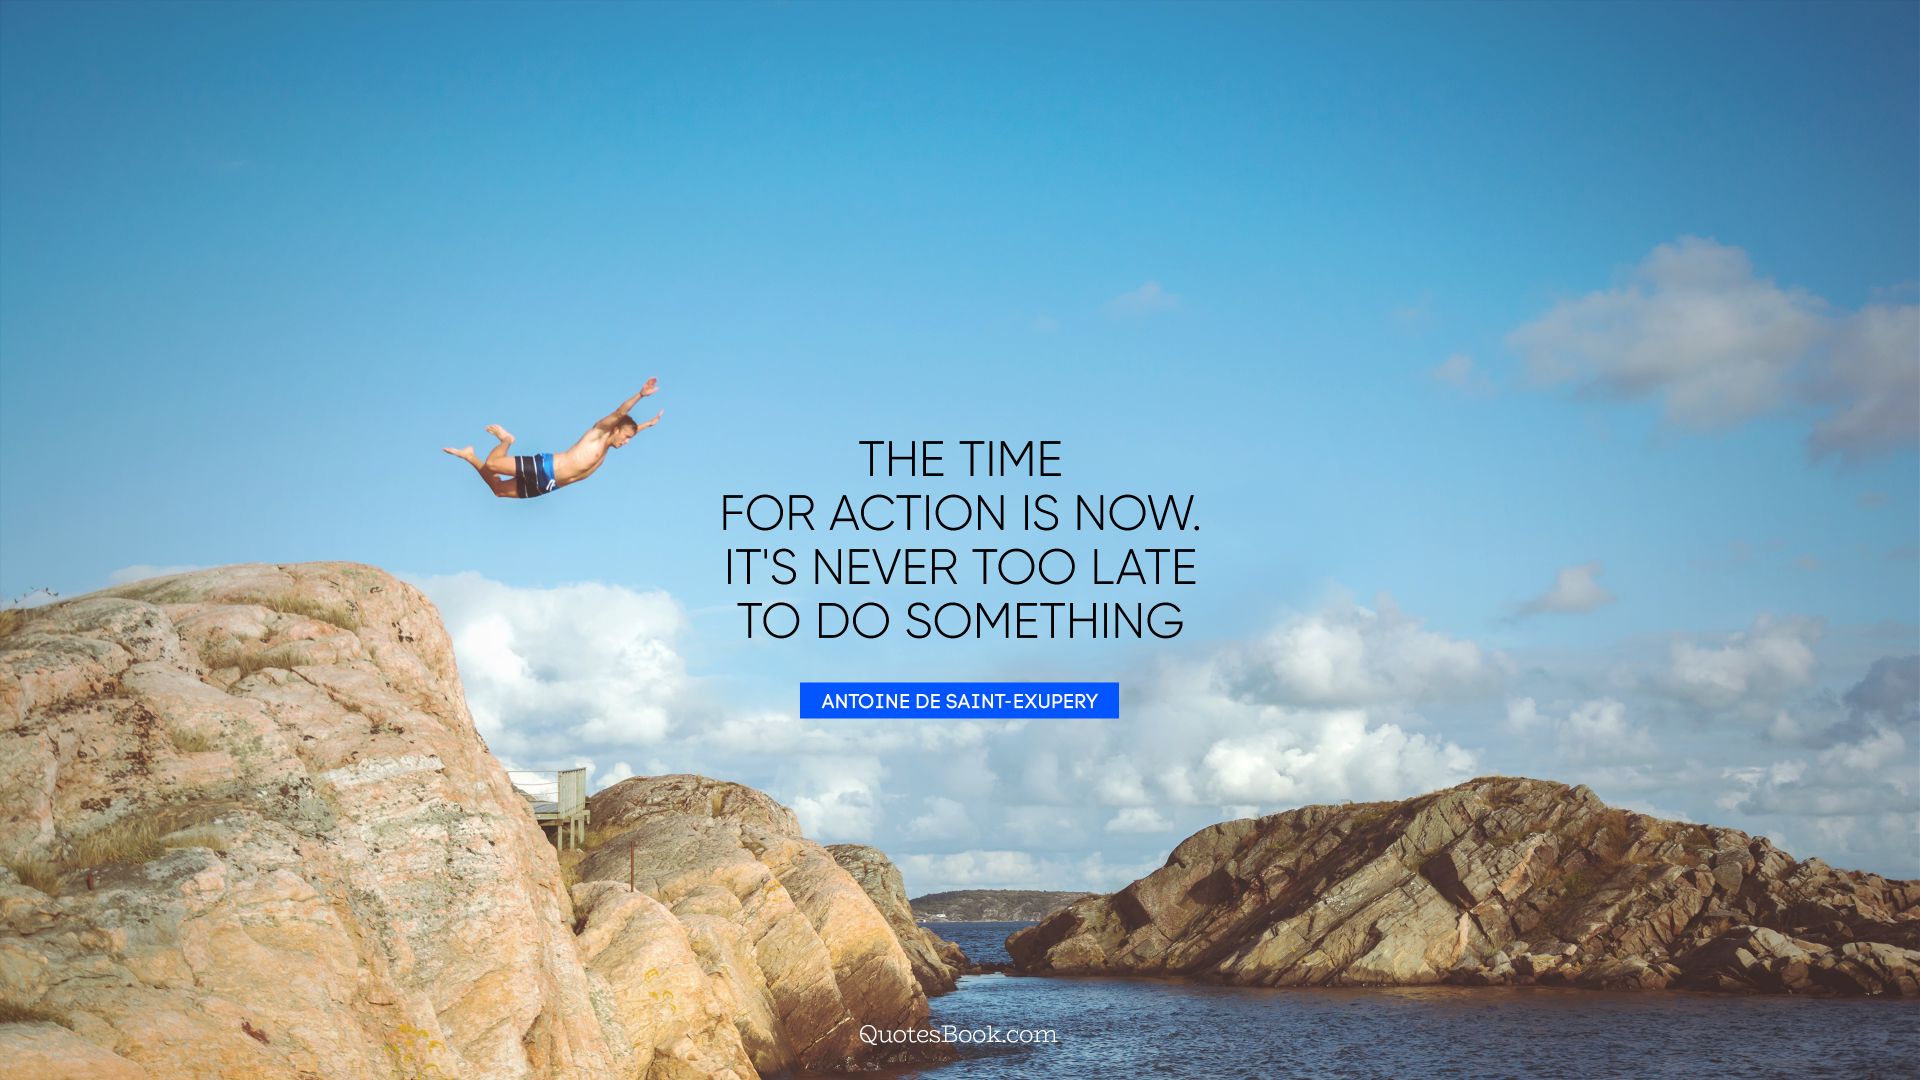 The time for action is now. It's never too late to do something. - Quote by Antoine de Saint-Exupery